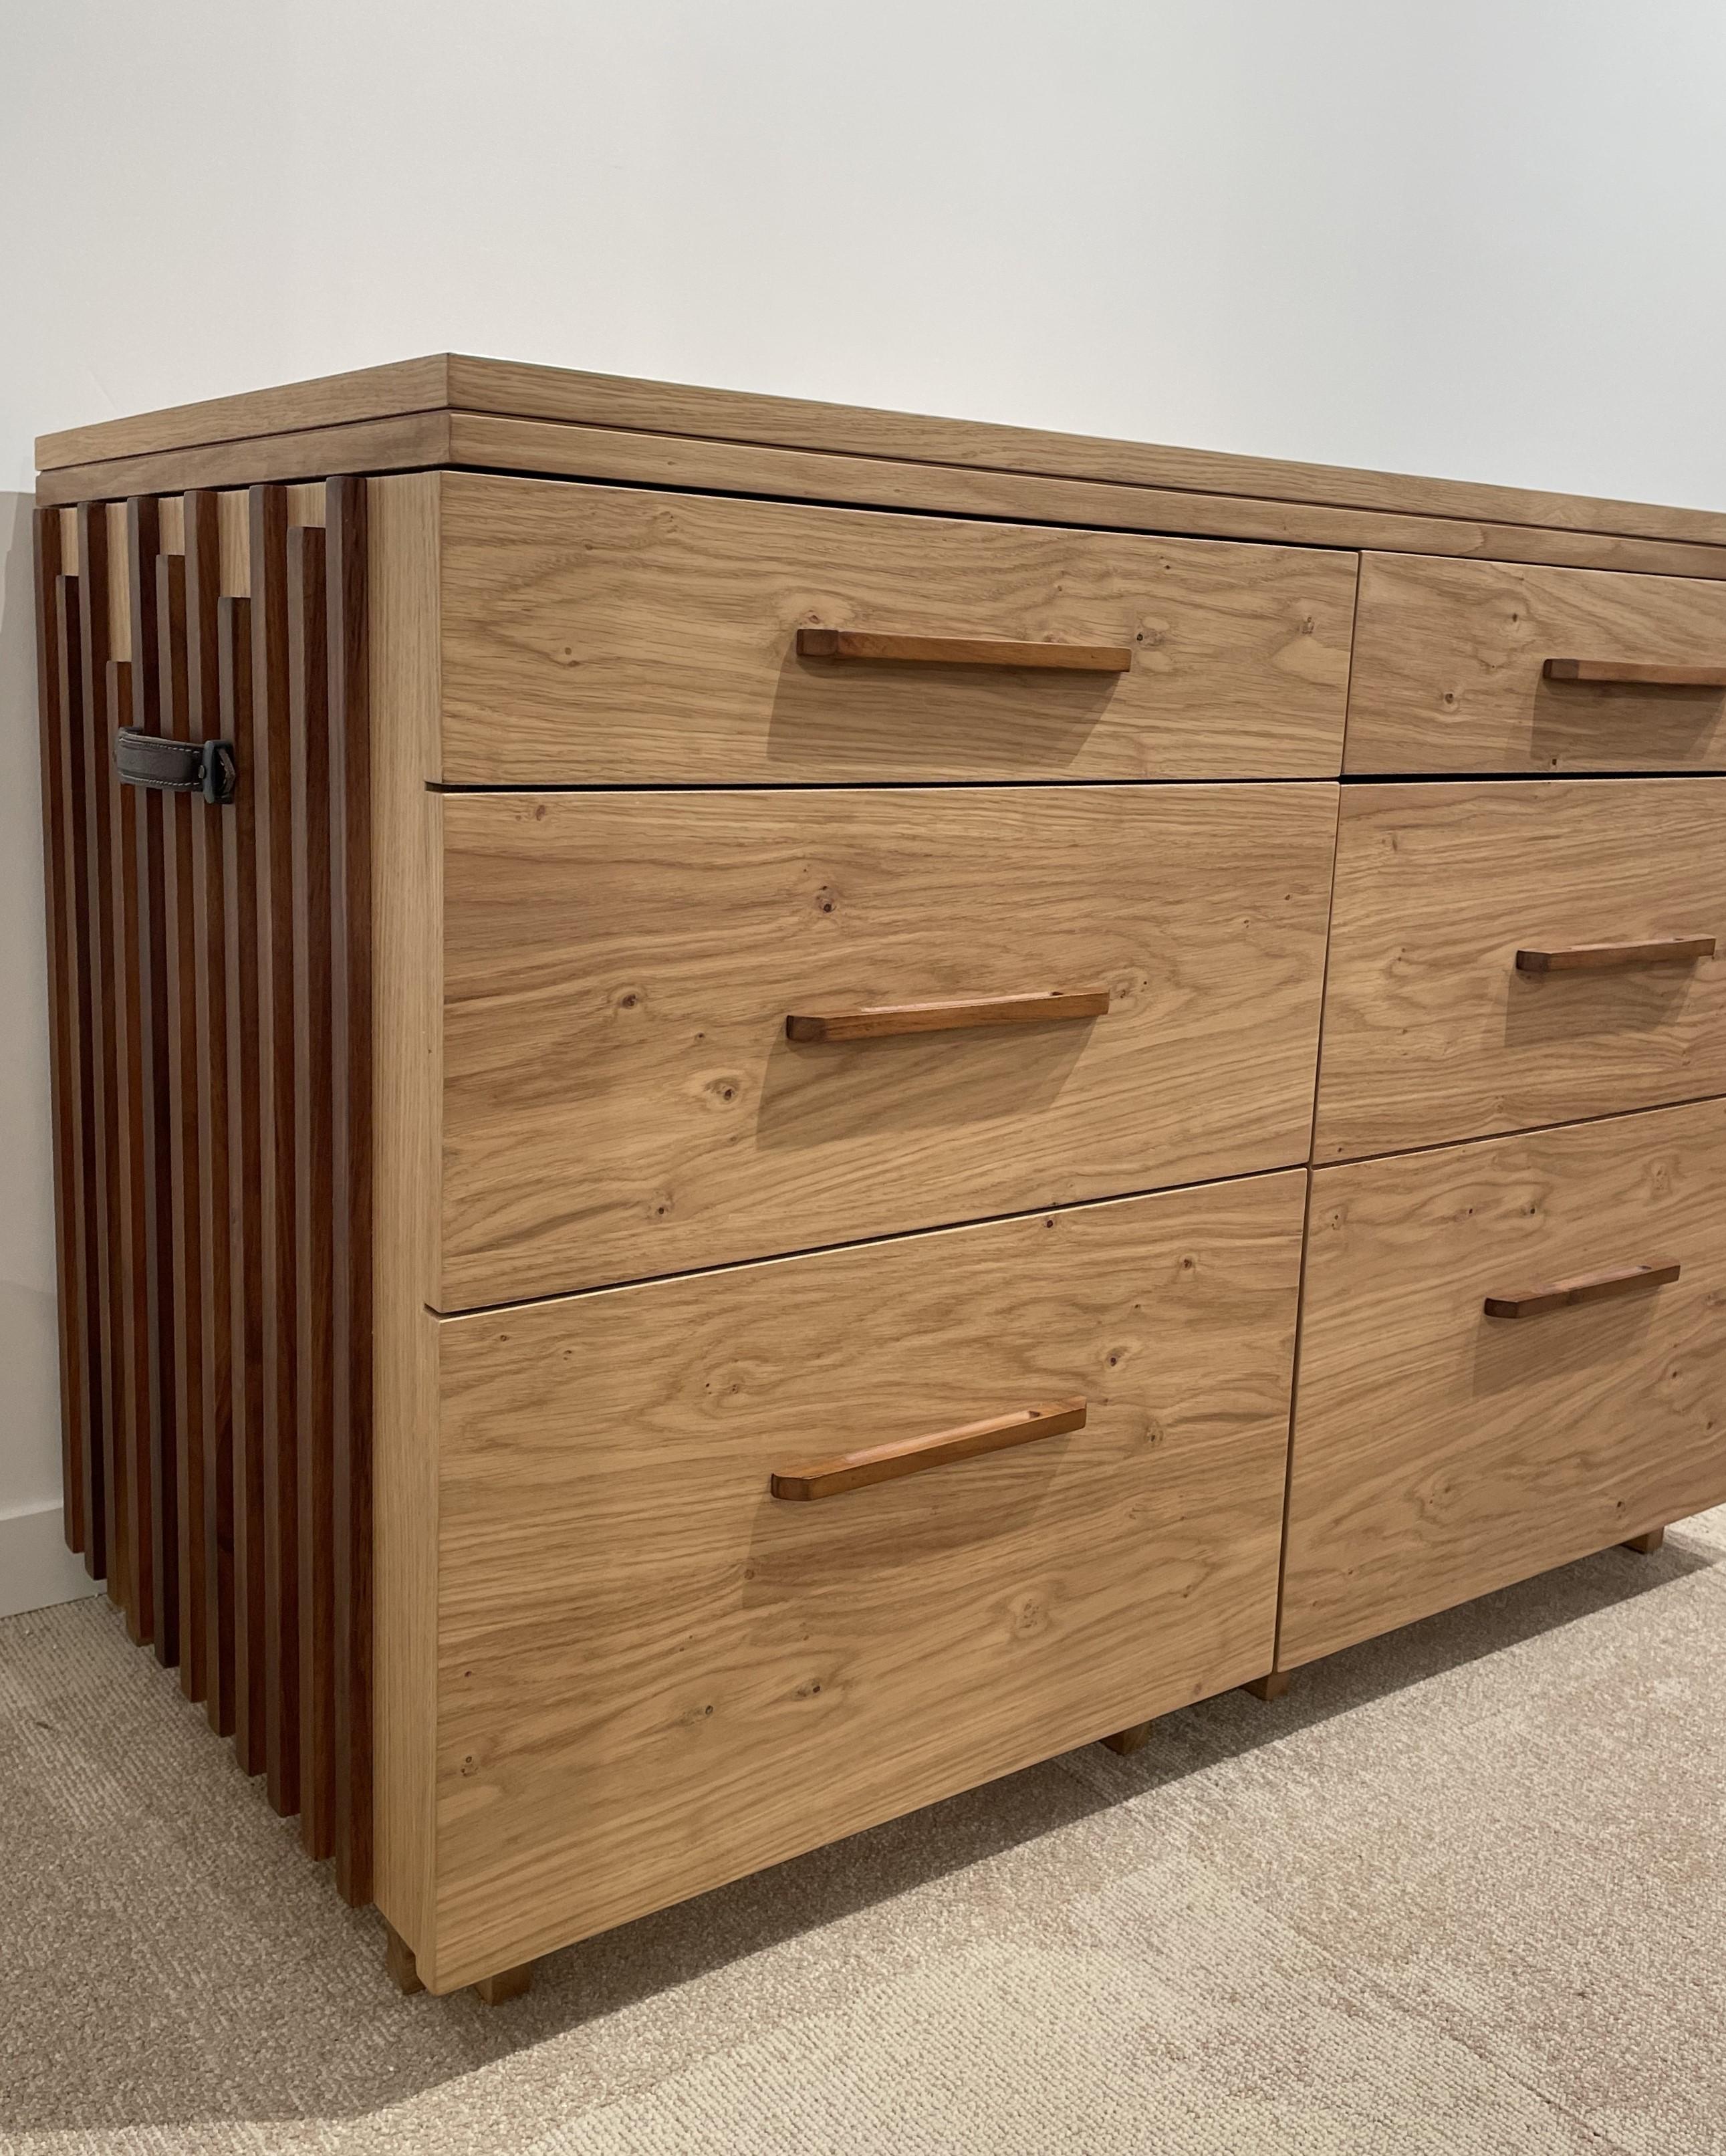 Scandinavian Design Solid Oak And Leather Modular Desk Into A Chest Of Drawers 3